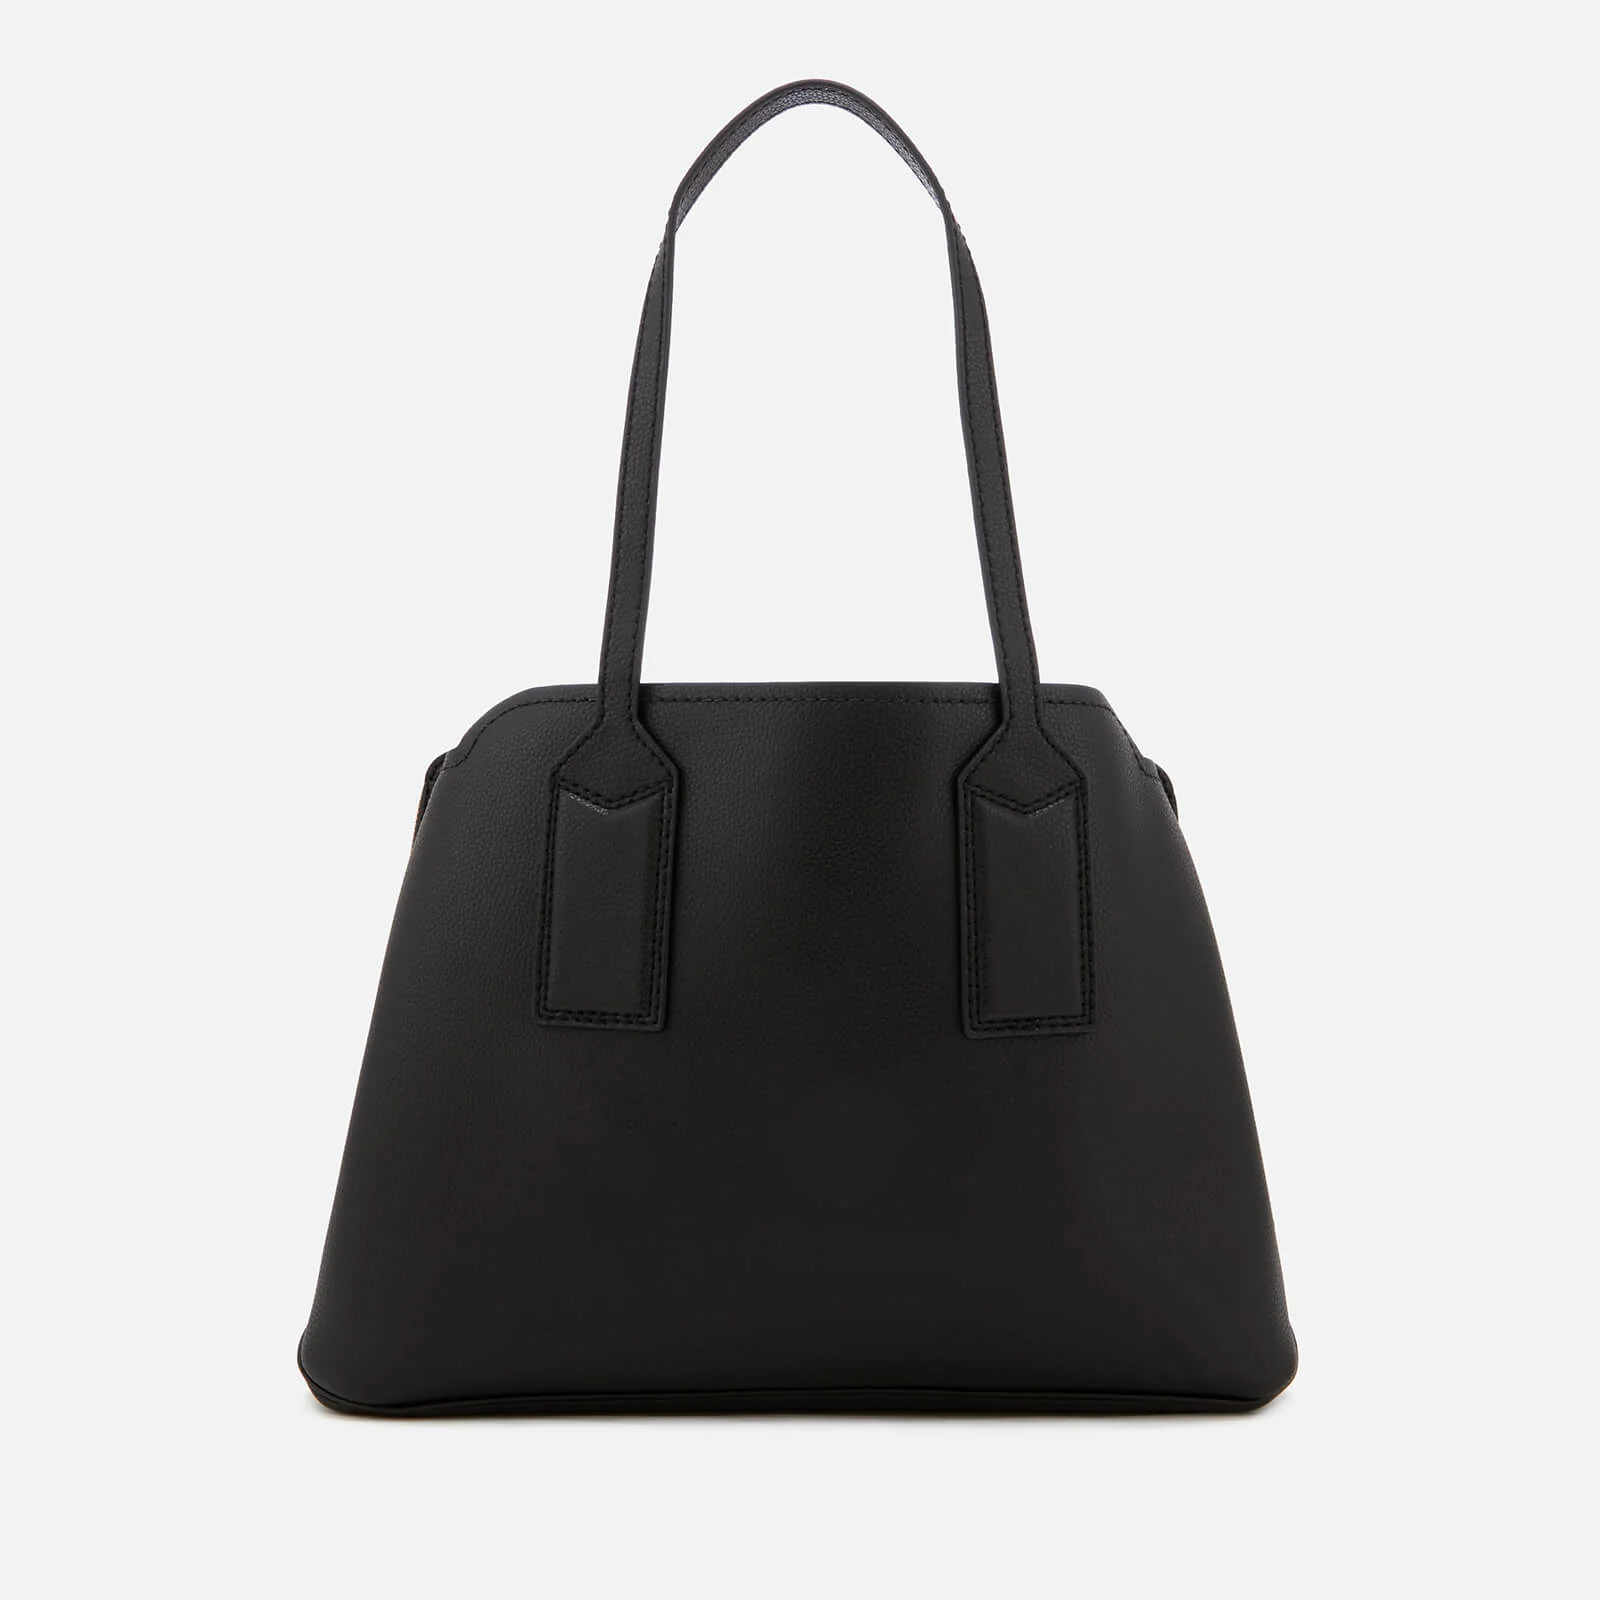 Marc Jacobs Women's The Editor Tote Bag - Black Image 1